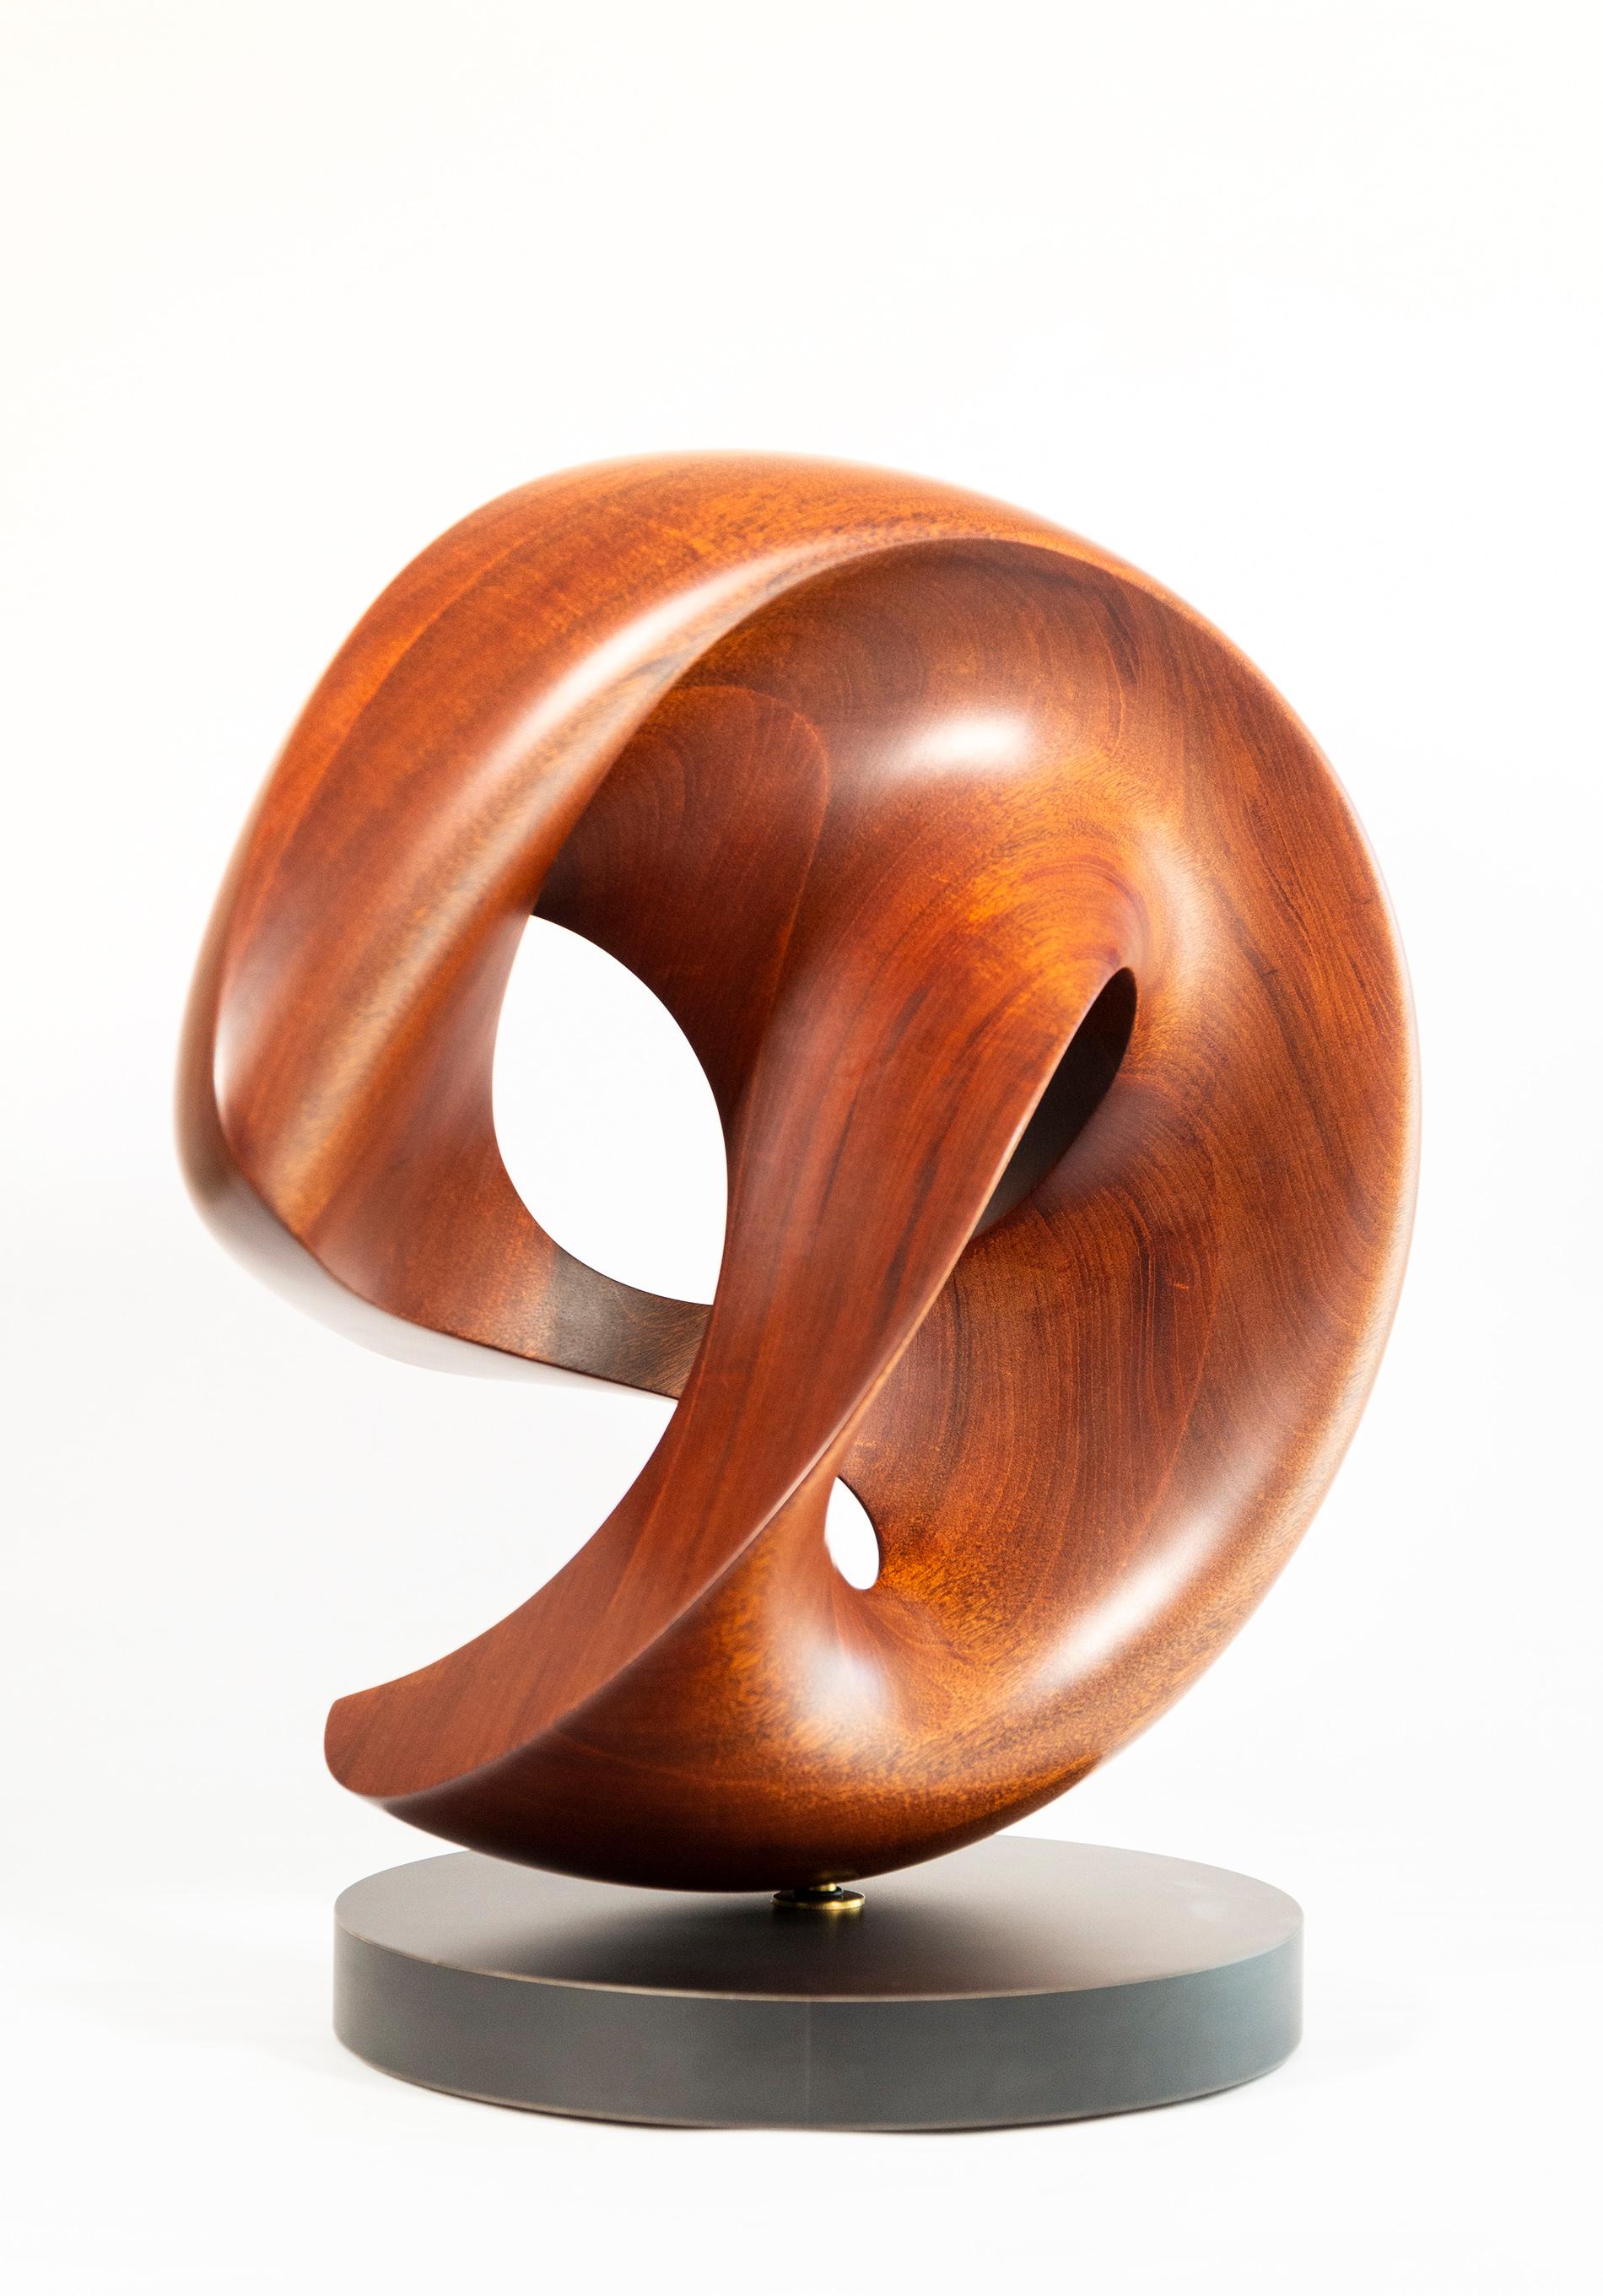 Fanfare - smooth, polished, abstract, contemporary, mahogany carved sculpture For Sale 6